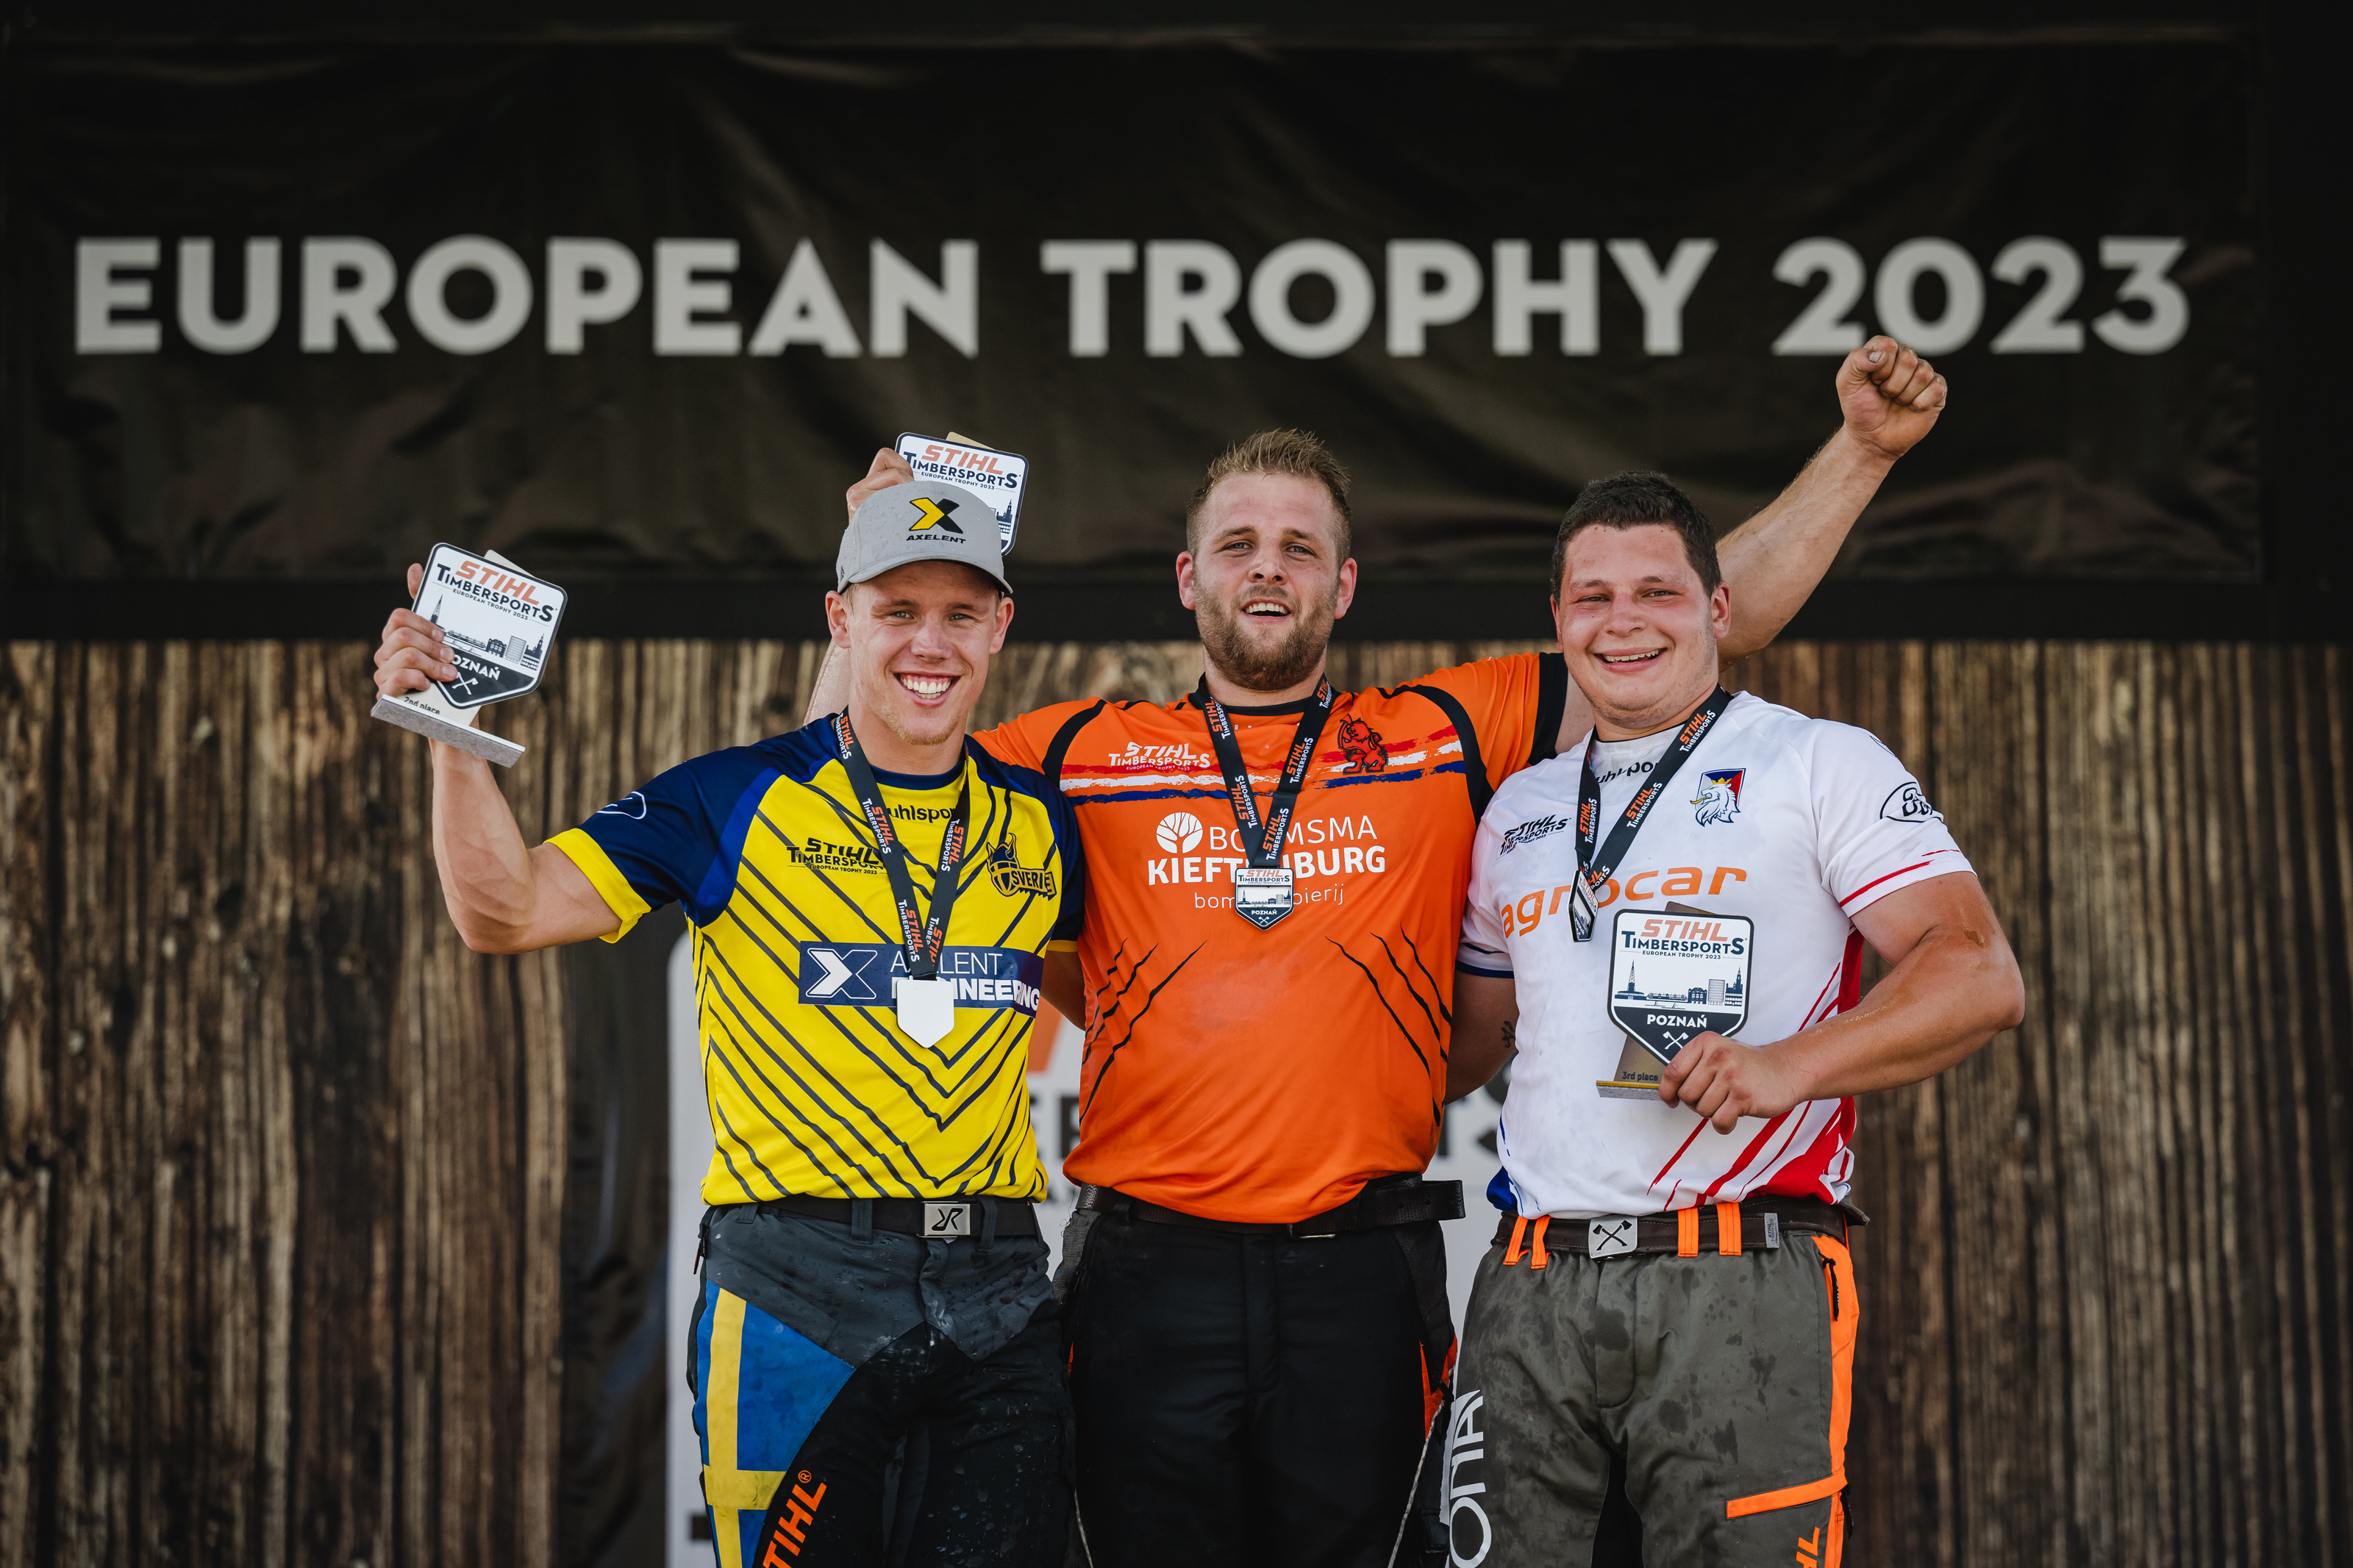 The top three in the 2023 European Trophy: The Netherland’s Redmer Knol (Centre), Ferry Svan of Sweden (L) and Matyáš Klíma of the Czech Republic (R).